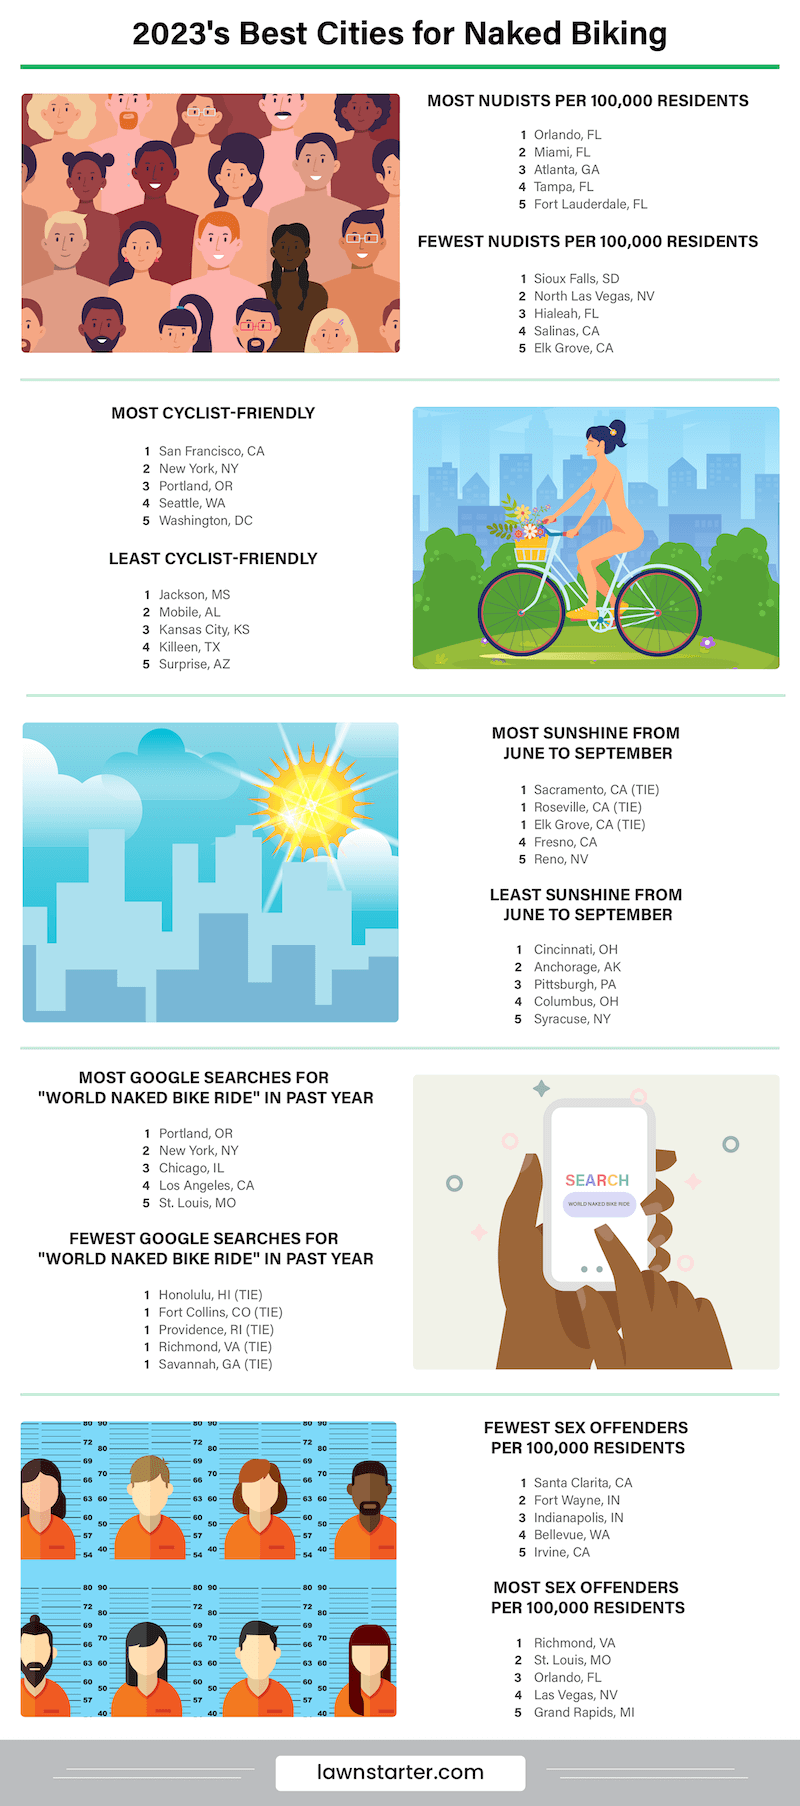 Infographic showing the Best Cities for Naked Biking, a ranking based on naked biking events, local interest in nude cycling, bikeability, public nudity laws, and more